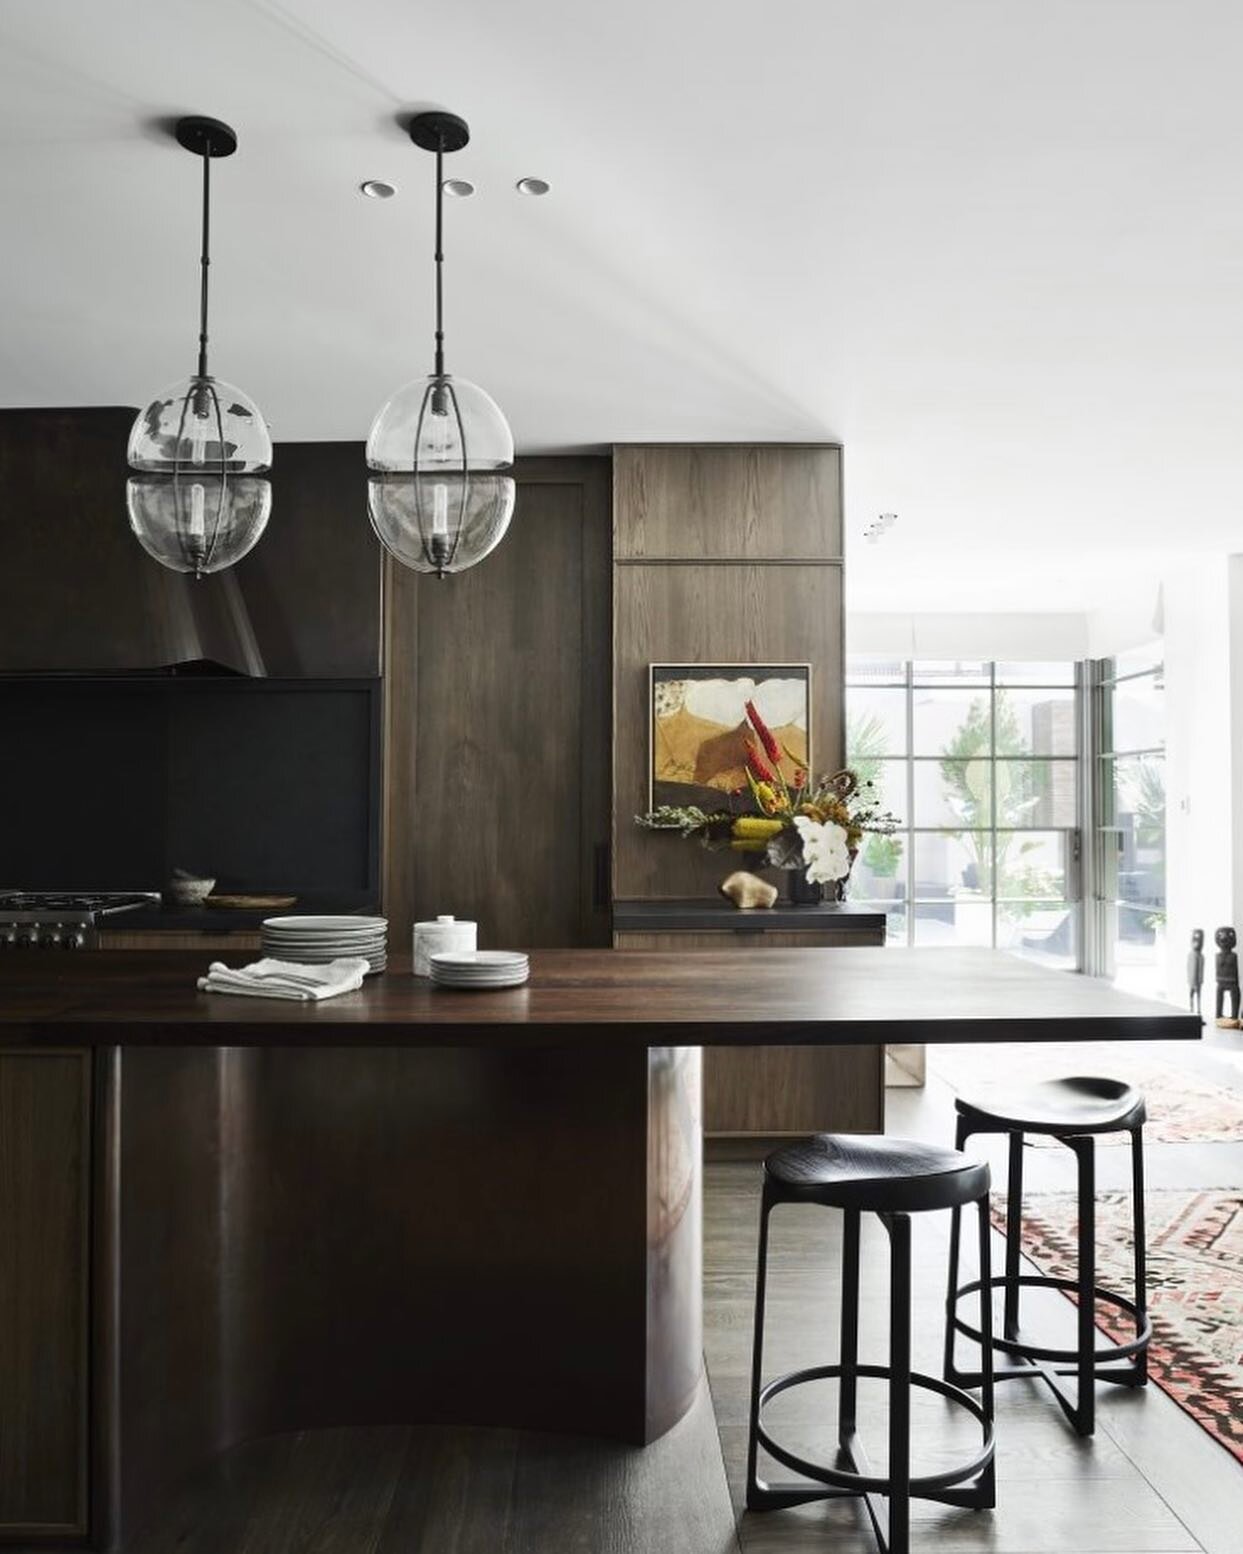 Contemporary meets authentic classic. 

These deep browns, textured blacks,
offset by natural light and sculptural details create the ultimate statement home that never goes out of style. 

What&rsquo;s your favourite element. 

Design @decus_interio